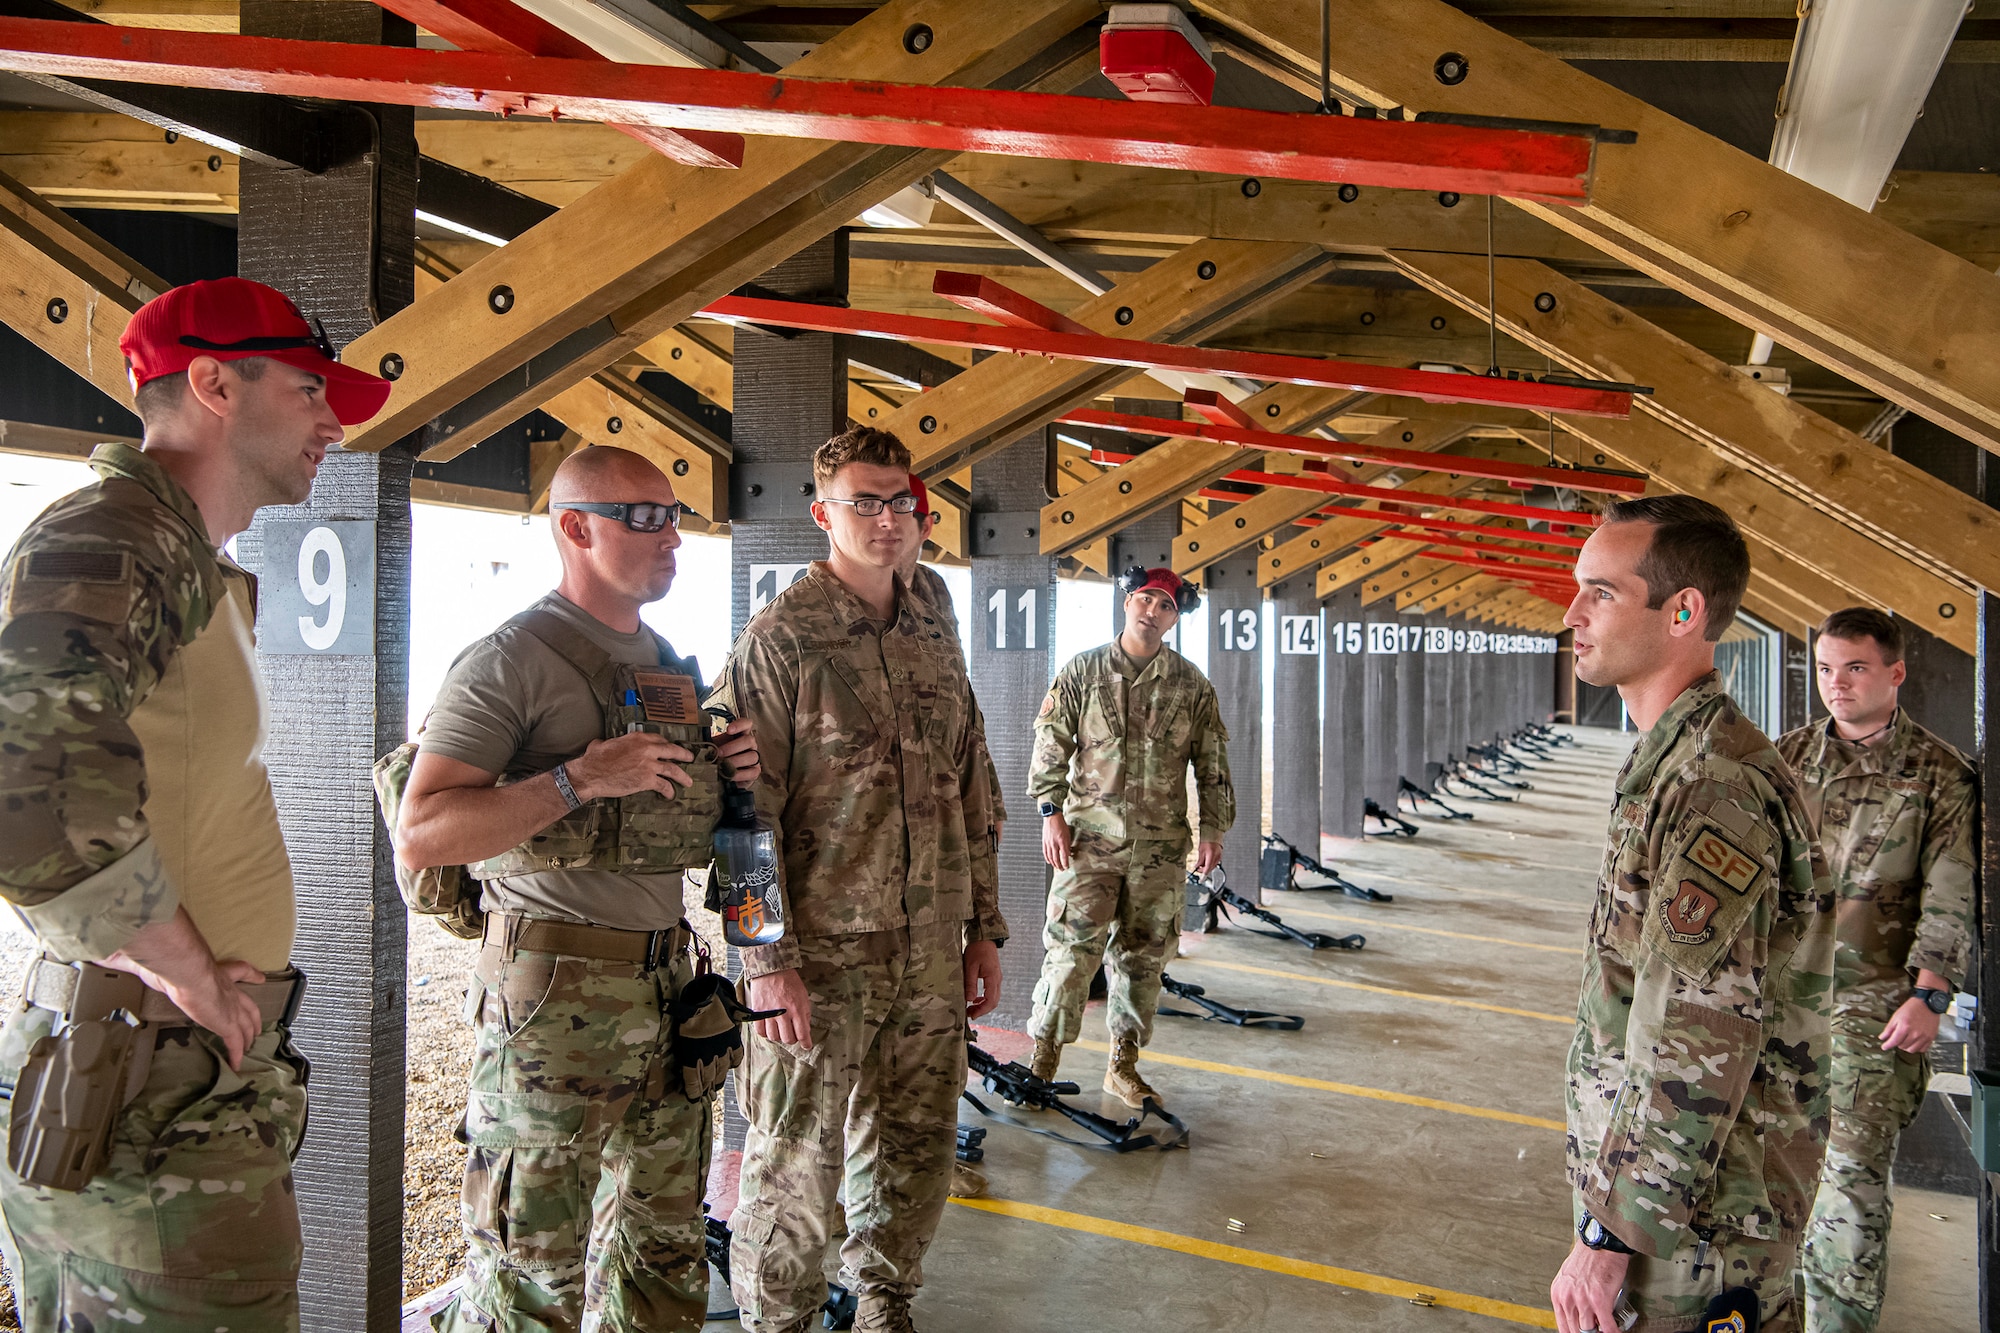 U.S. Air Force Maj. Daniel Merkh, center right, 423d Security Forces Squadron commander, speaks with instructors from the 435th Contingency Response Group and 820th Base Defense Group during a proficiency course at RAF Molesworth, England, Aug. 19, 2022. During the course instructors from the 820th Base Defense Group and 435th Contingency Response Group provided oversight and guidance to help critique and advance the combat arms skills of the defenders from the 423d SFS. (U.S. Air Force photo by Staff Sgt. Eugene Oliver)